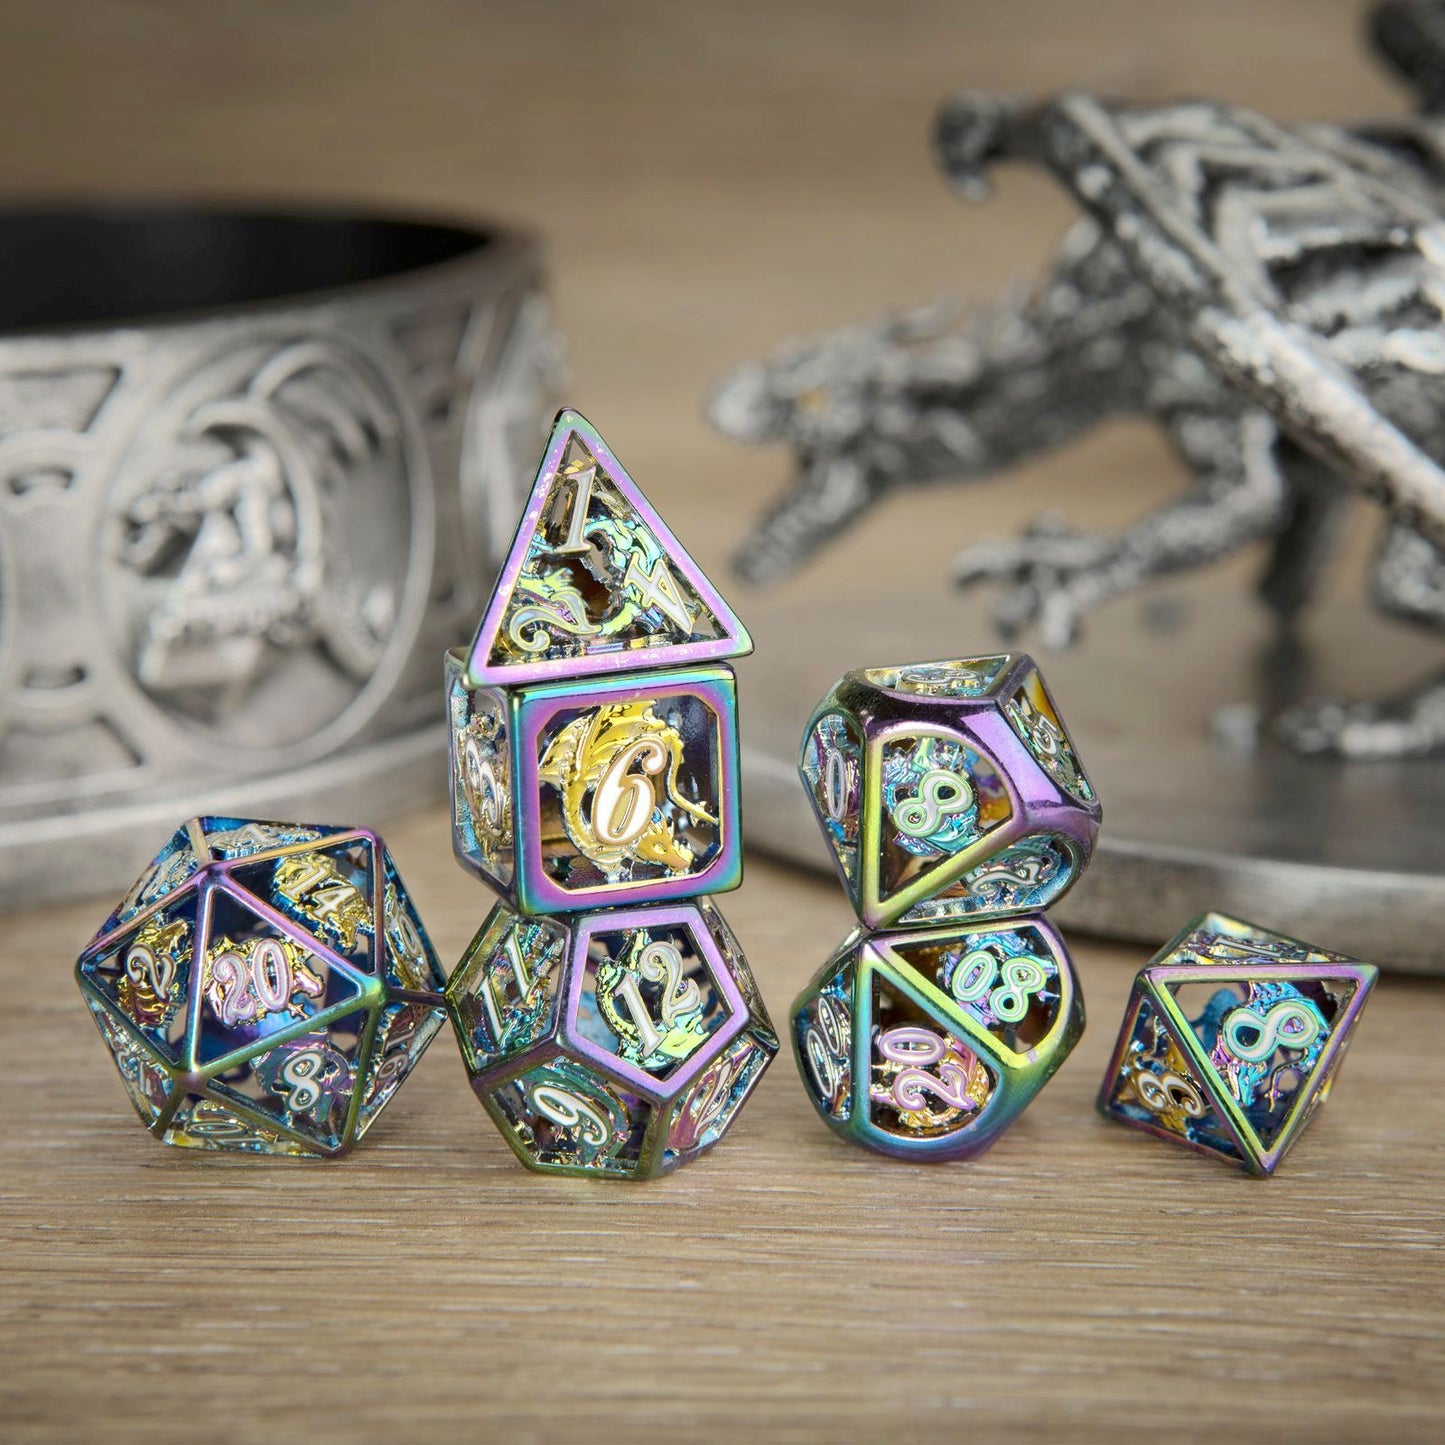 Prism hollow dragon dice set for TRPG D&D board games - HYMGHO Dice 